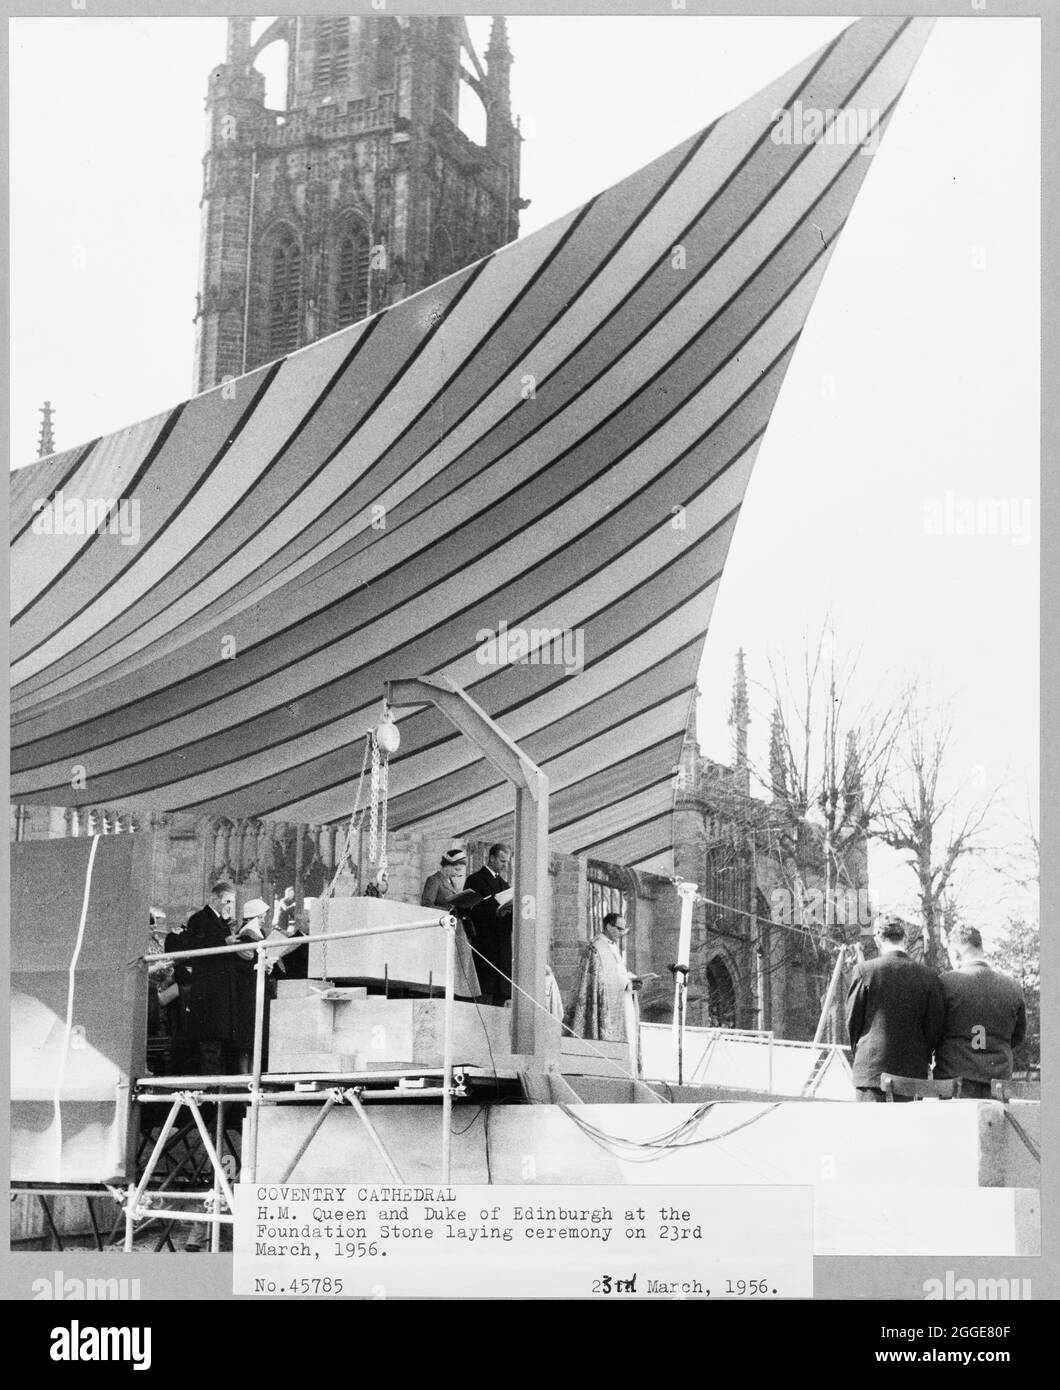 View of Her Majesty the Queen and the Duke of Edinburgh at the foundation stone laying ceremony of Coventry Cathedral. Following the bombing of Coventry Cathedral in November 1940, a competition was launched in 1950 to find a design for a new cathedral. The winning design was by Sir Basil Spence (1907-1976) from one of over 200 designs submitted. Building work took place between the mid-1950s and 1962. Queen Elizabeth II laid the foundation stone on 23th March 1956. Stock Photo